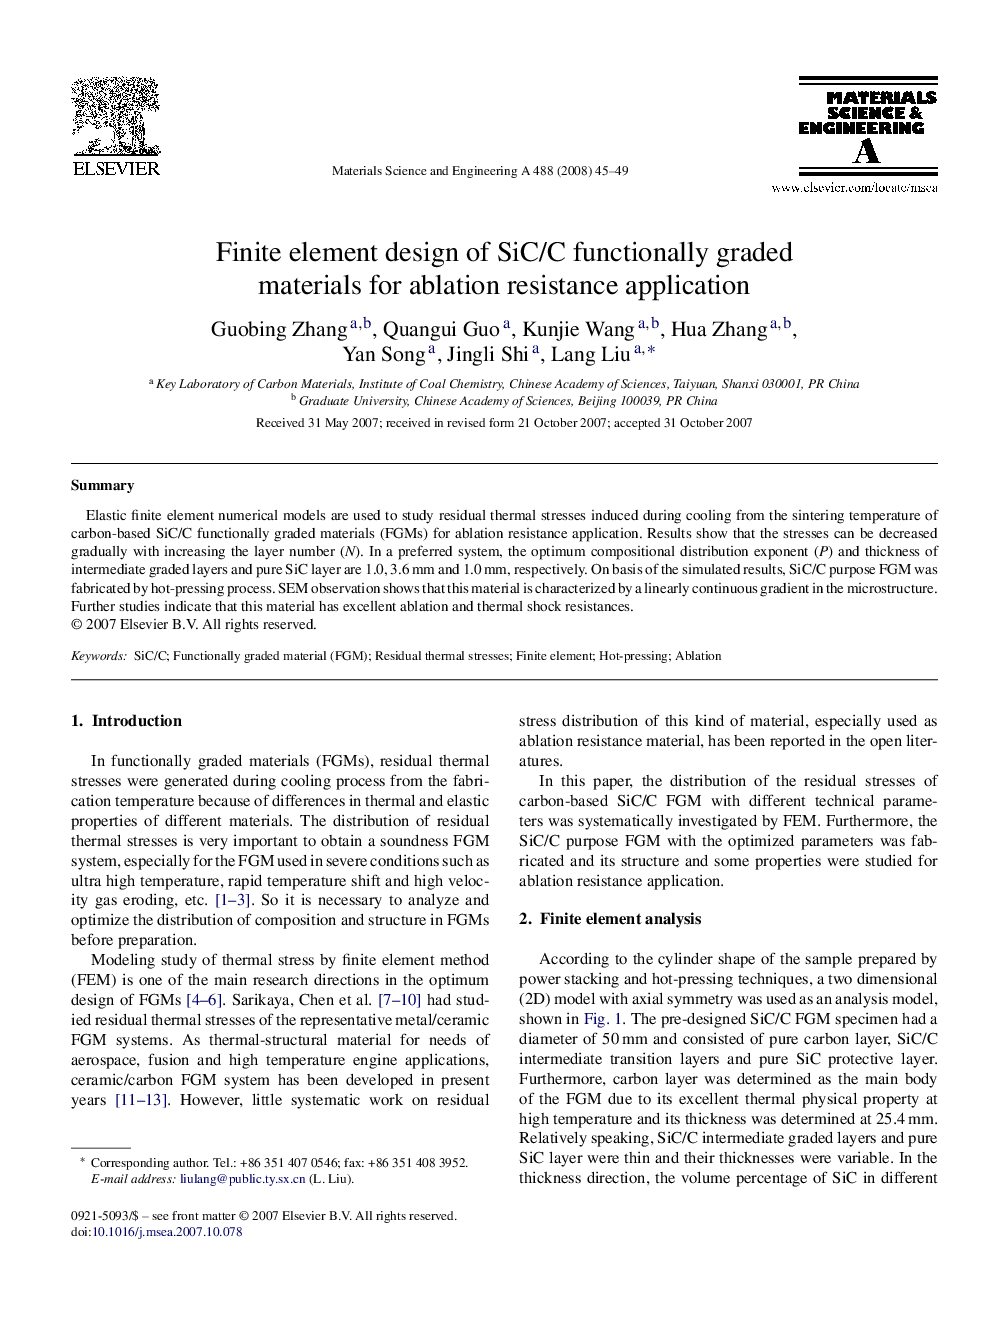 Finite element design of SiC/C functionally graded materials for ablation resistance application